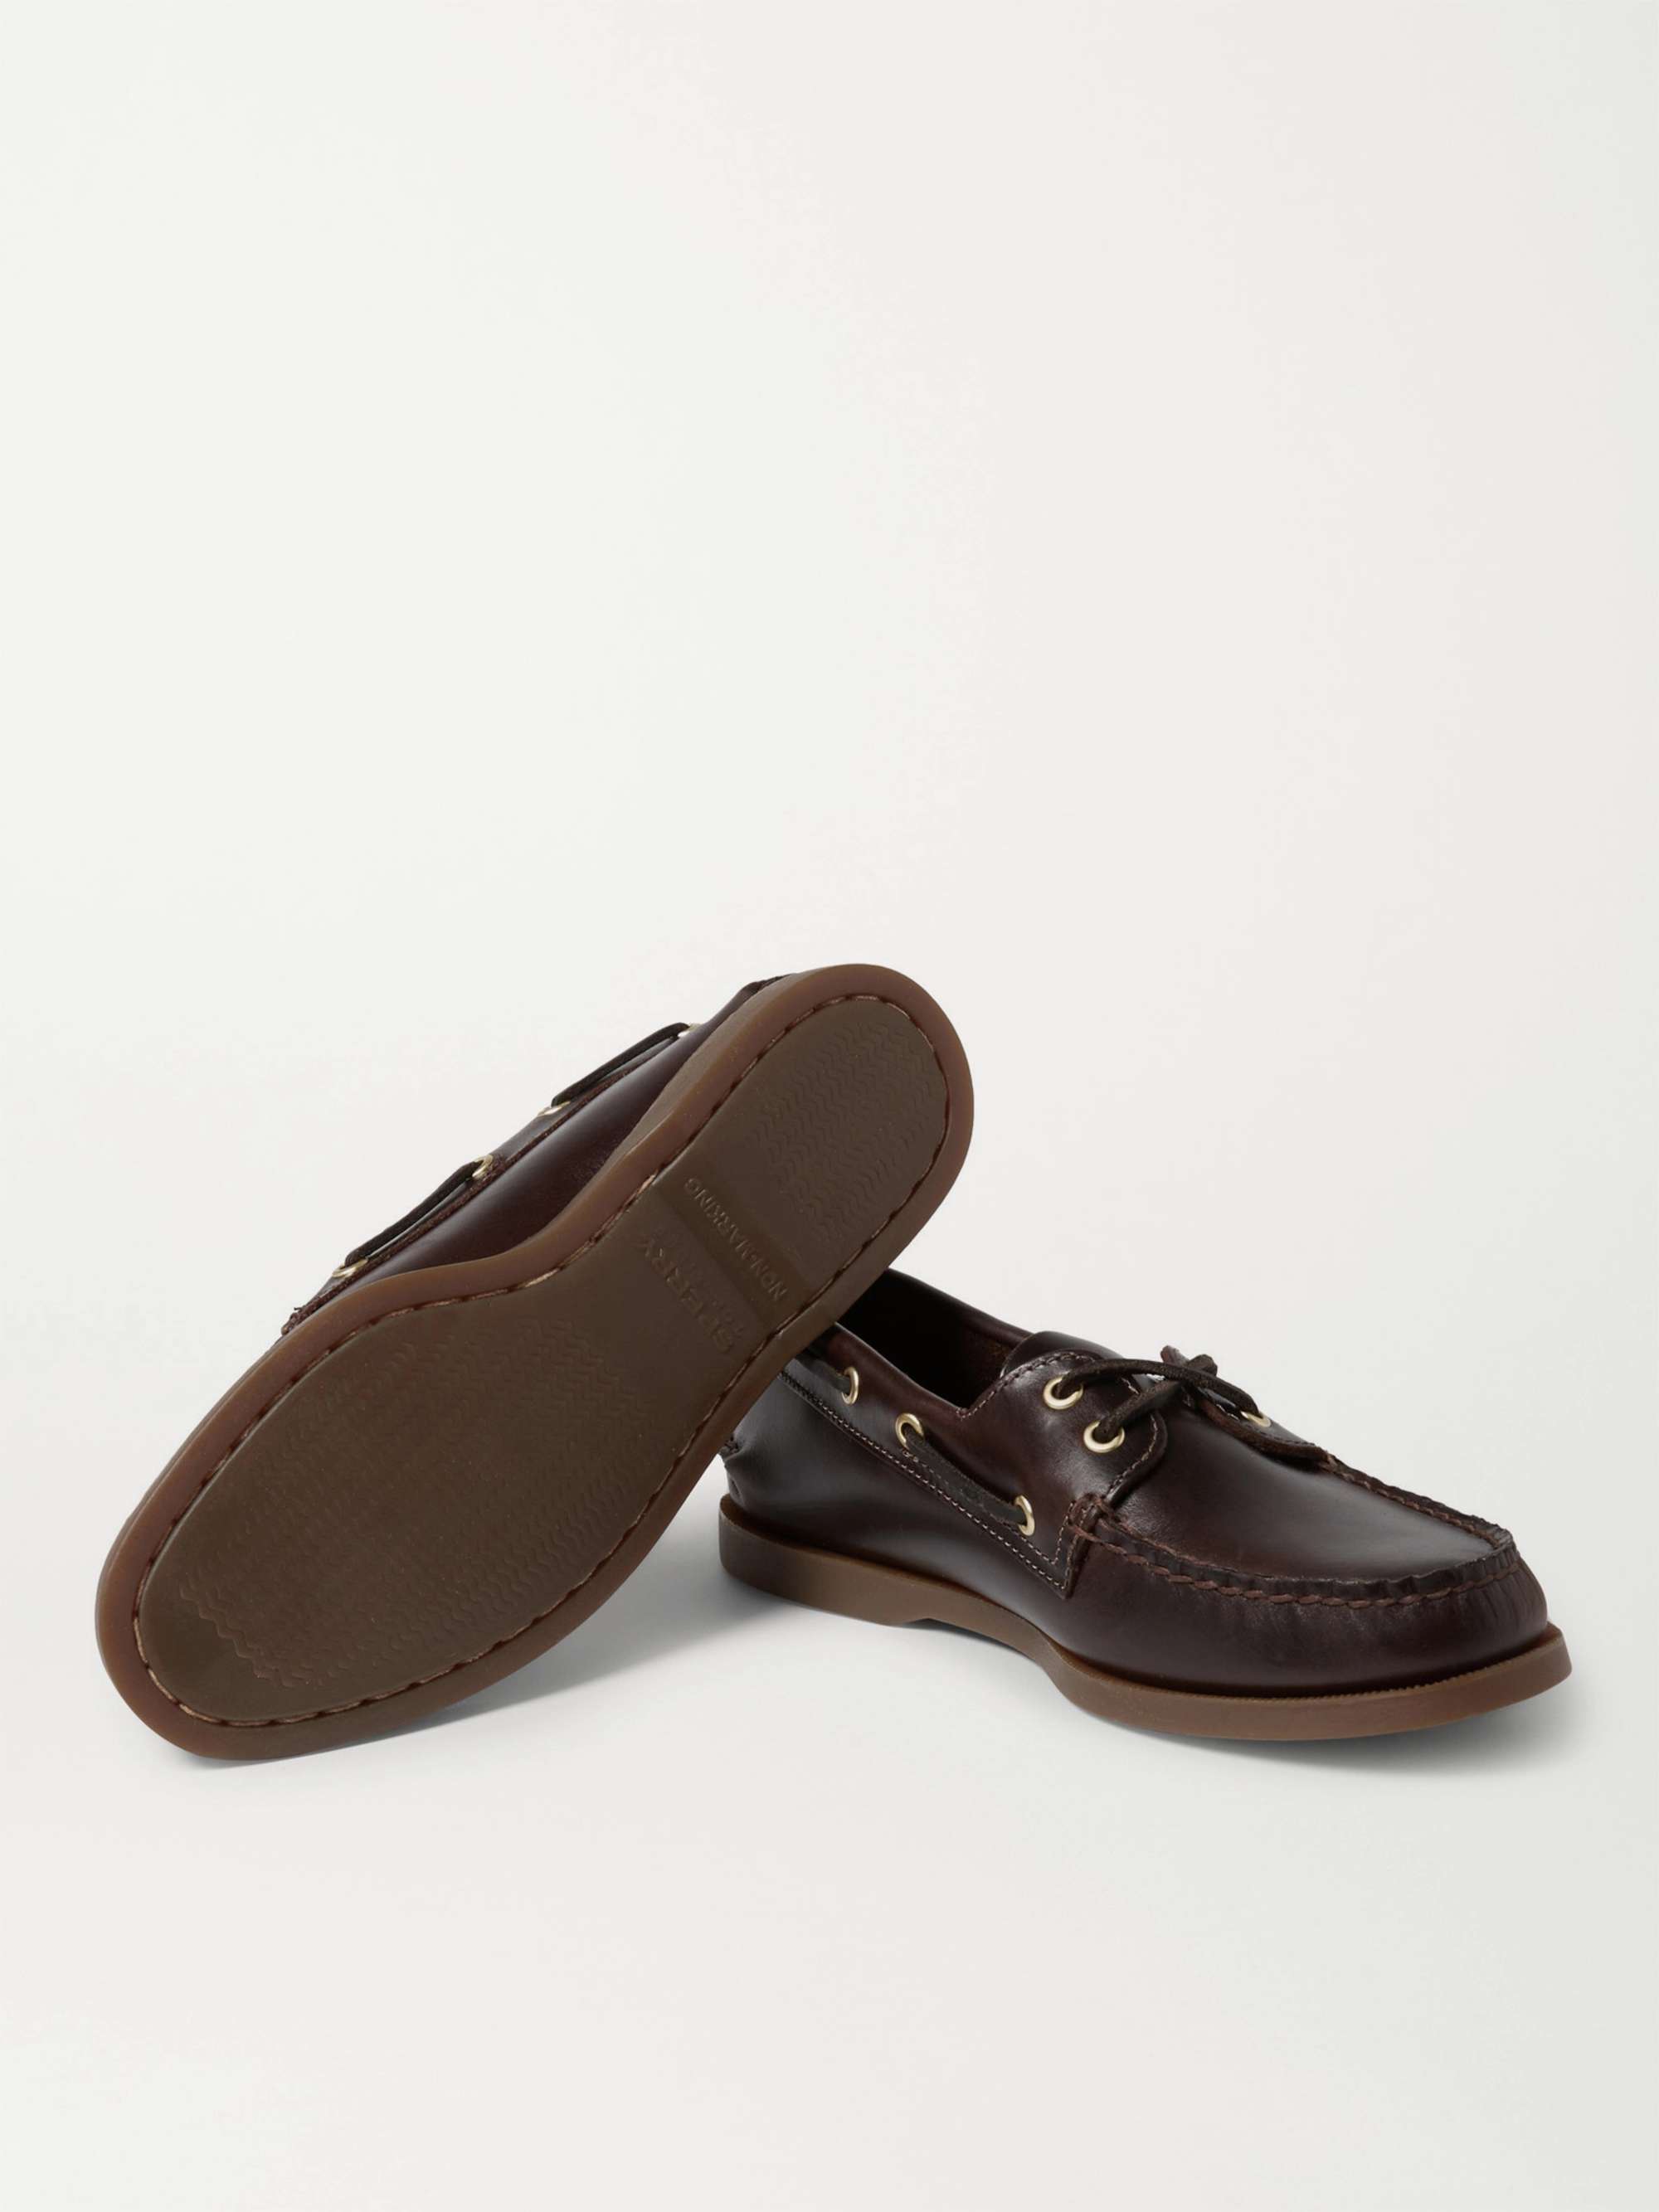 SPERRY Authentic Original Burnished-Leather Boat Shoes for Men | MR PORTER